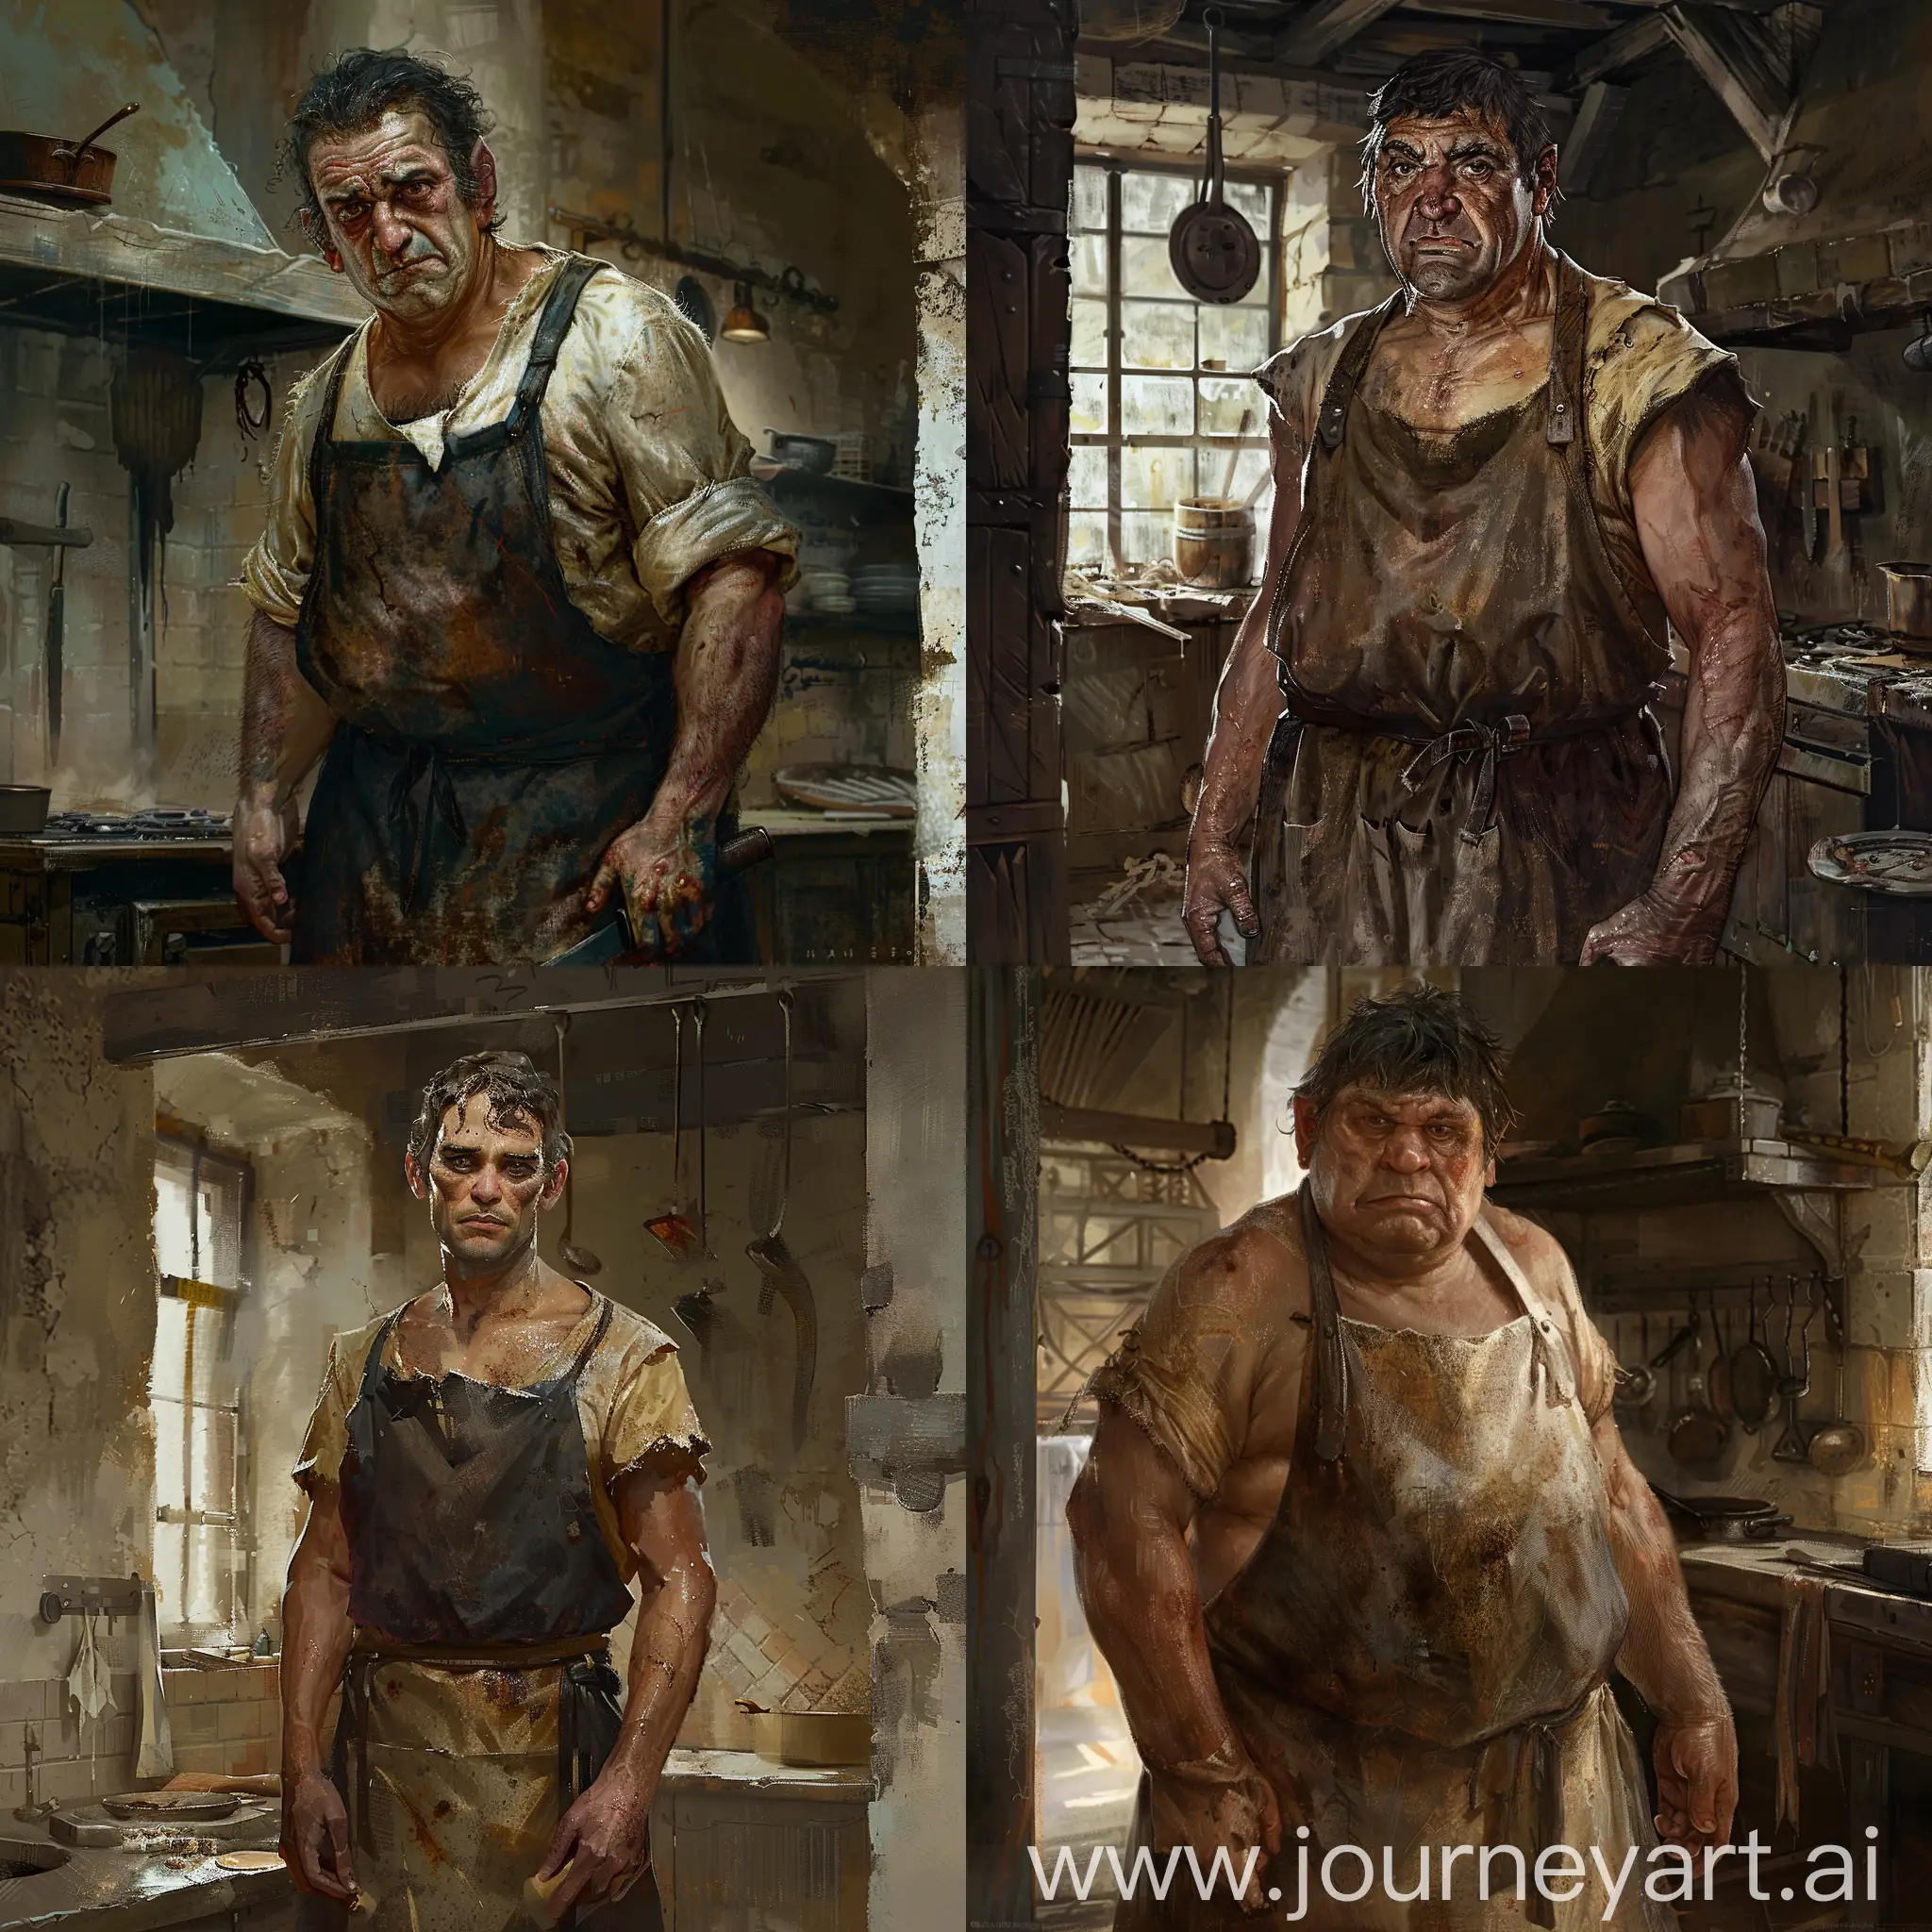 Draw a realistic art of a character from the Dungeons and Dragons universe according to the following description:
He is crooked human cook. He is dressed in a dirty apron. His face looks is dirty but healthy.

Hi is standing in the old filthy kitchen